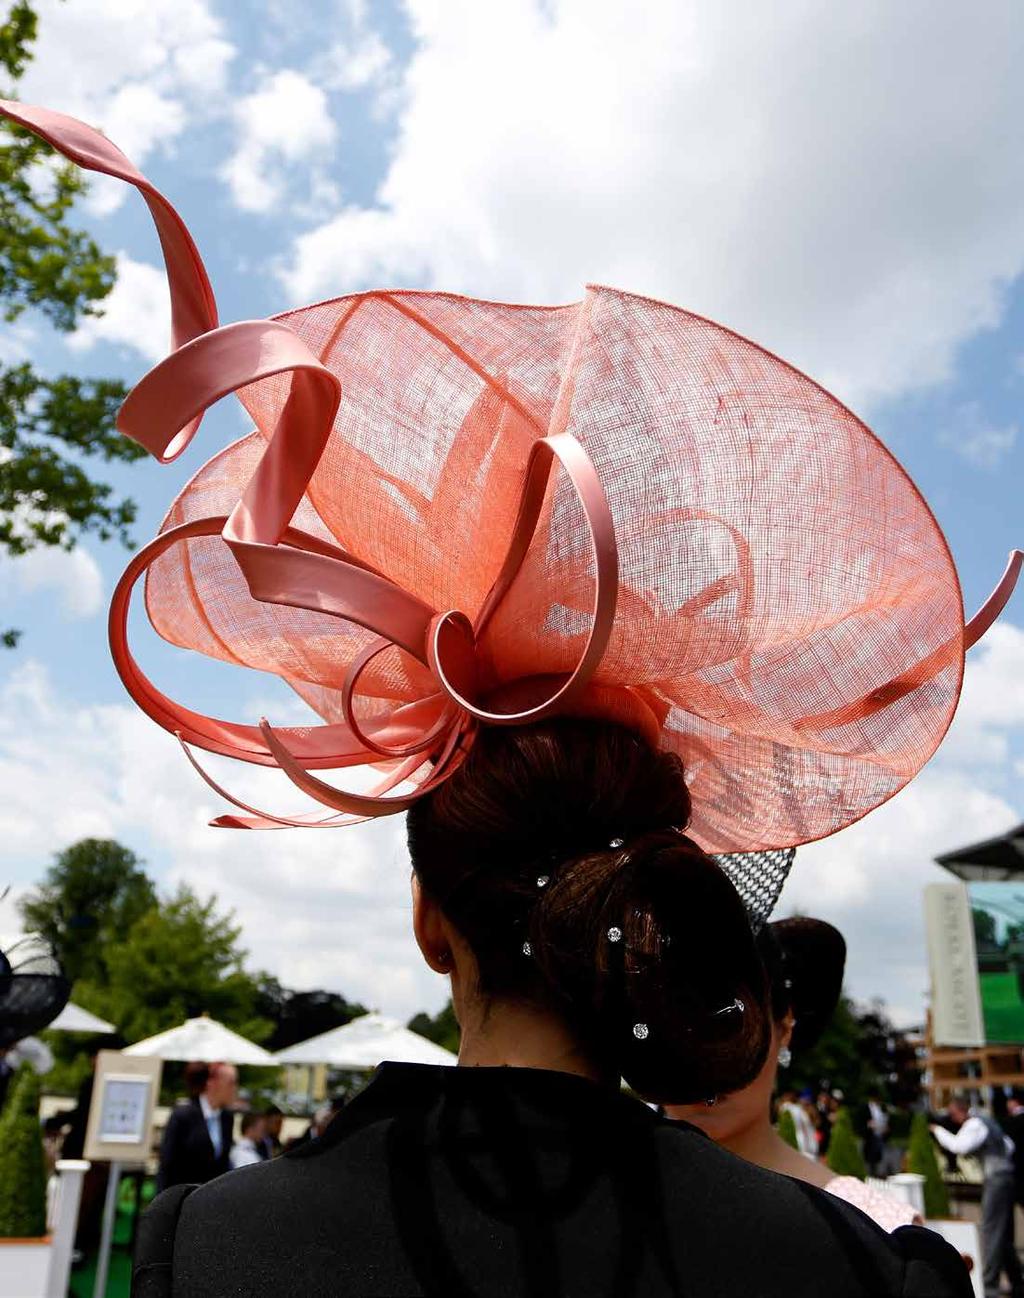 NOMINATION PROCEDURES Royal Ascot Group One races close on 25th April (24th April for American nominations) and the King George closes 13th June (12th June for American nominations).